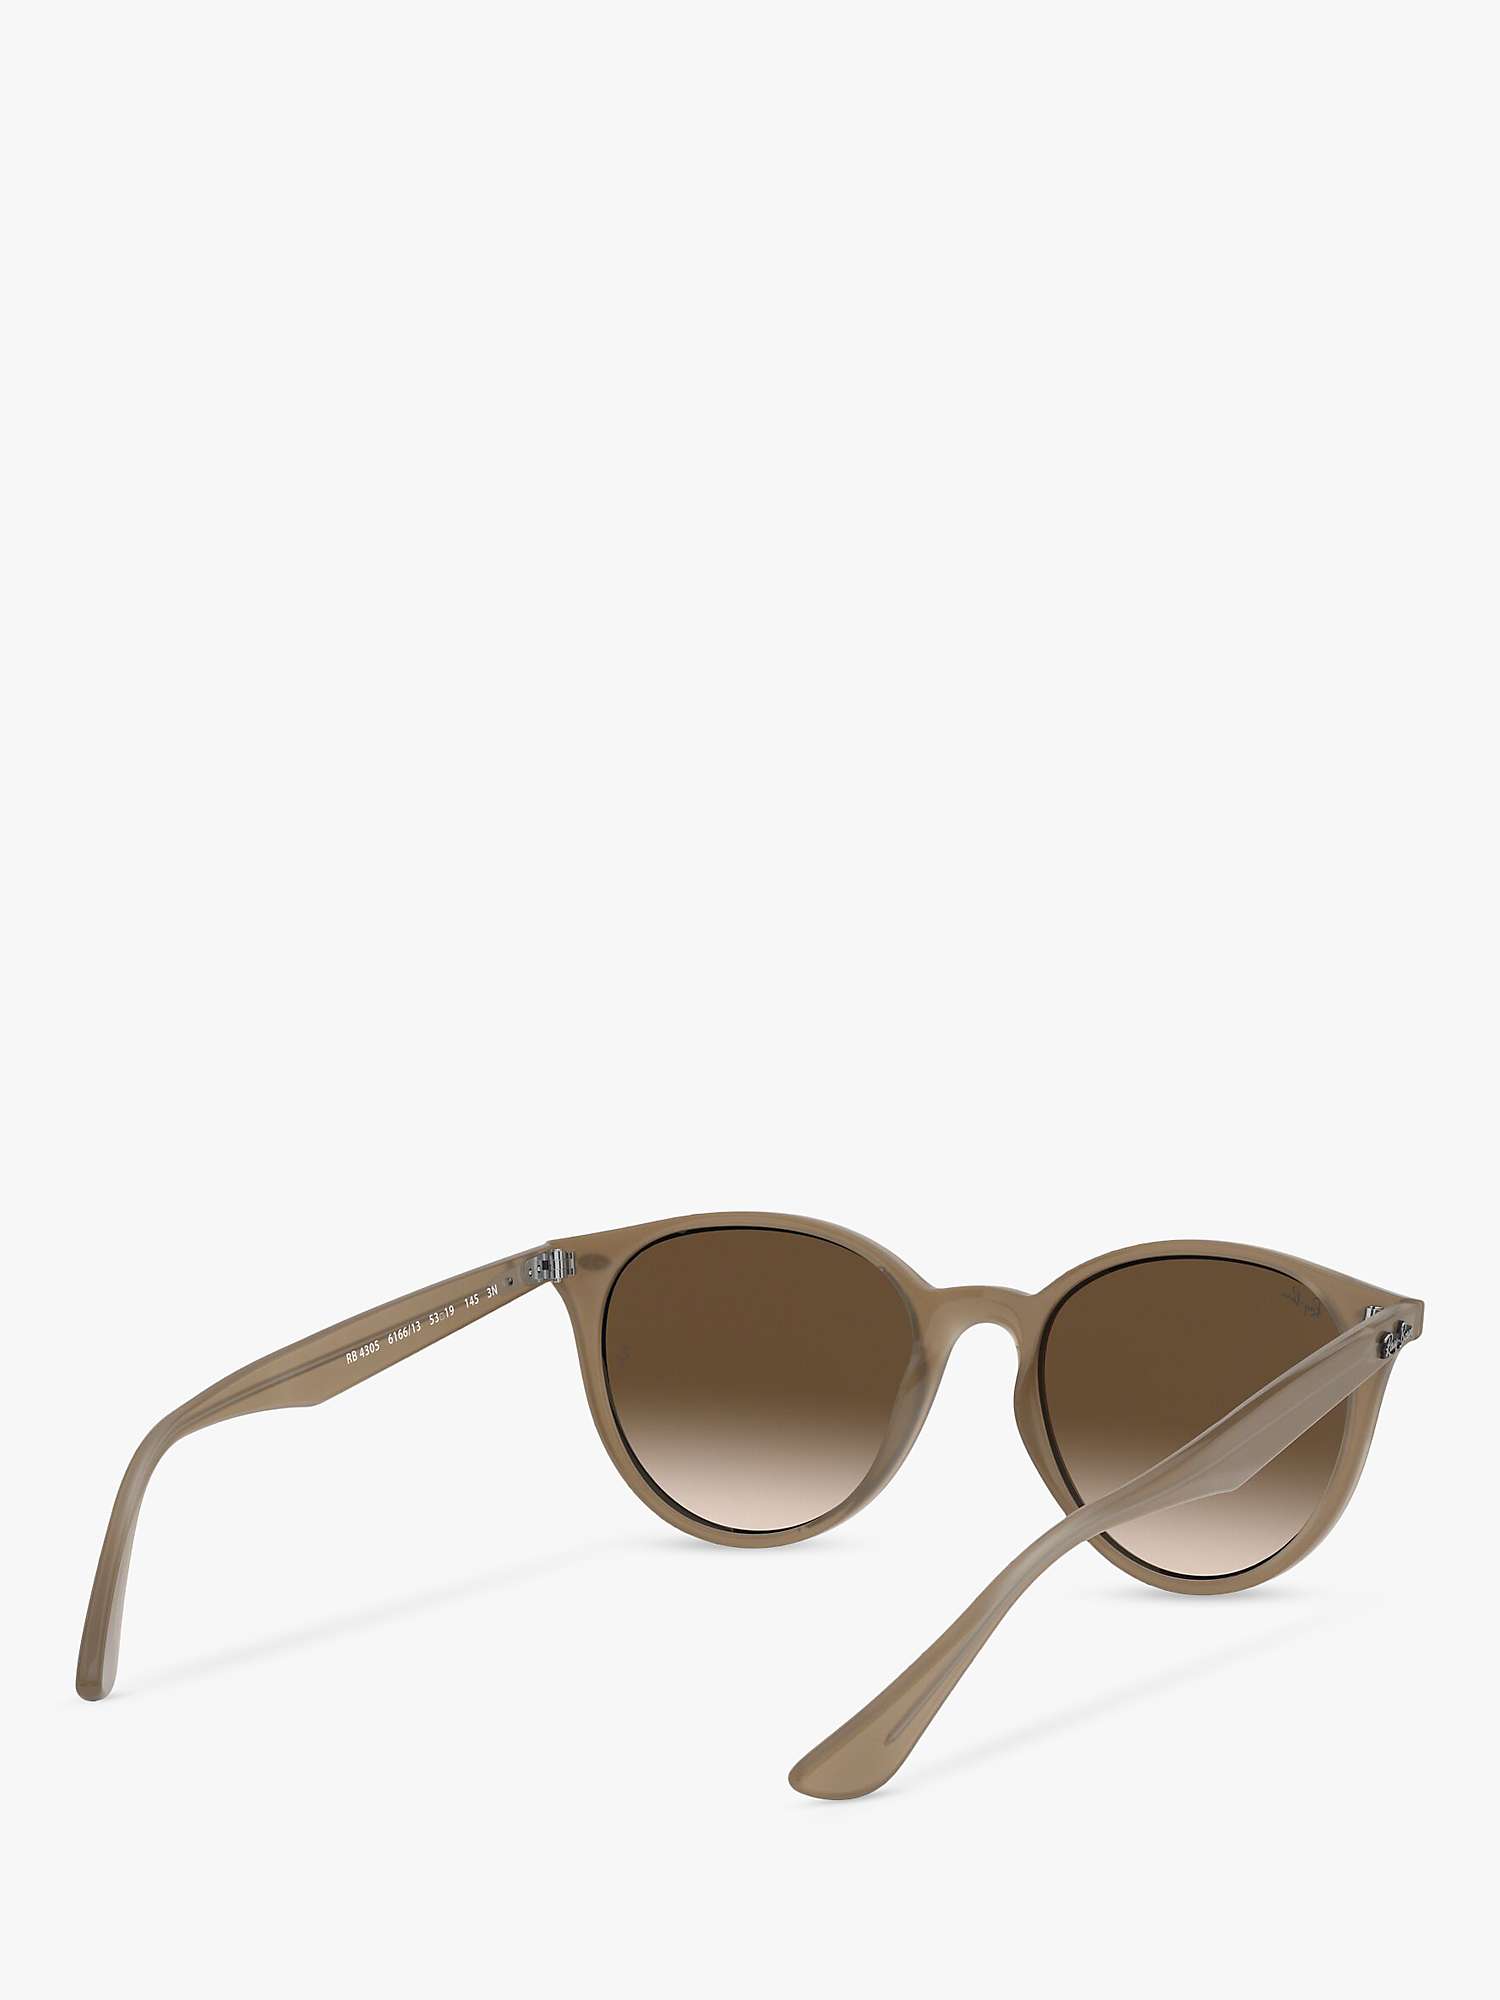 Buy Ray-Ban RB4305 Unisex Oval Sunglasses, Opal Beige/Brown Gradient Online at johnlewis.com